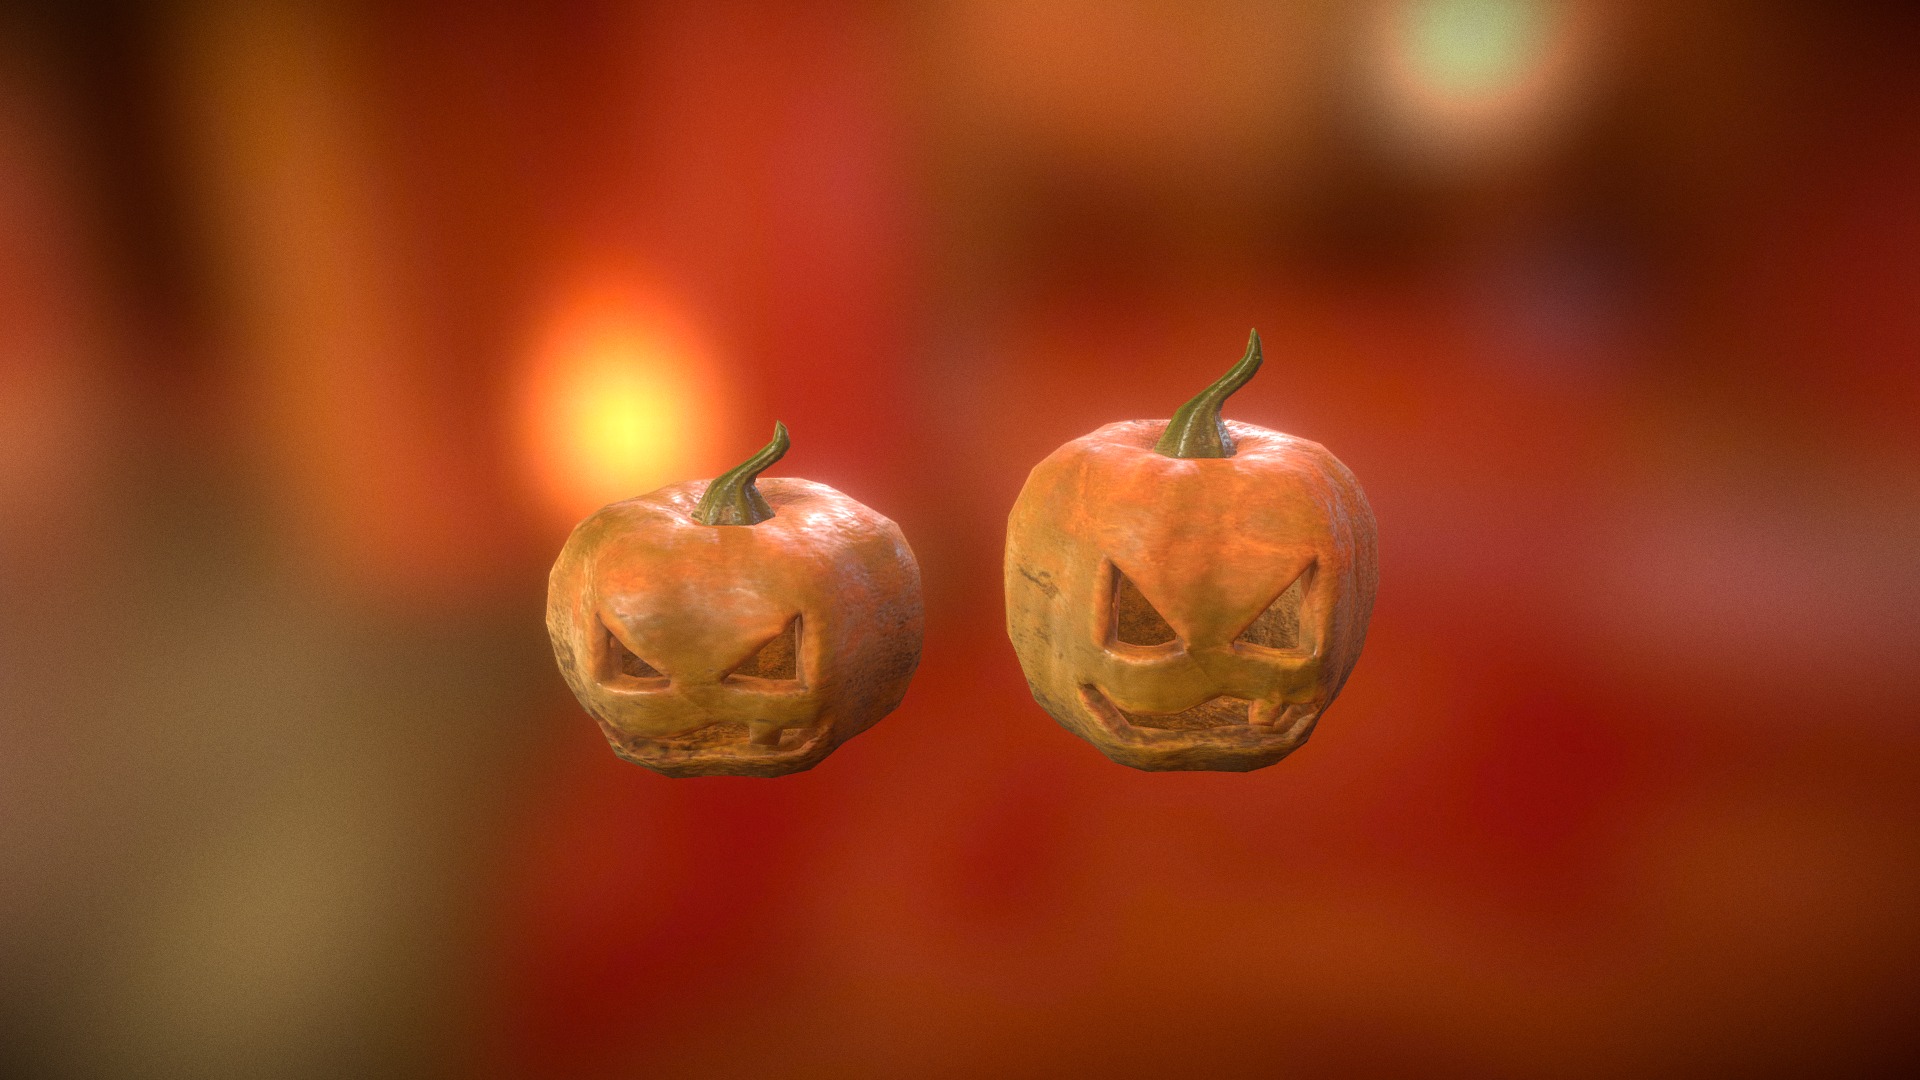 3D model pumpkin - This is a 3D model of the pumpkin. The 3D model is about two fruits with stems.